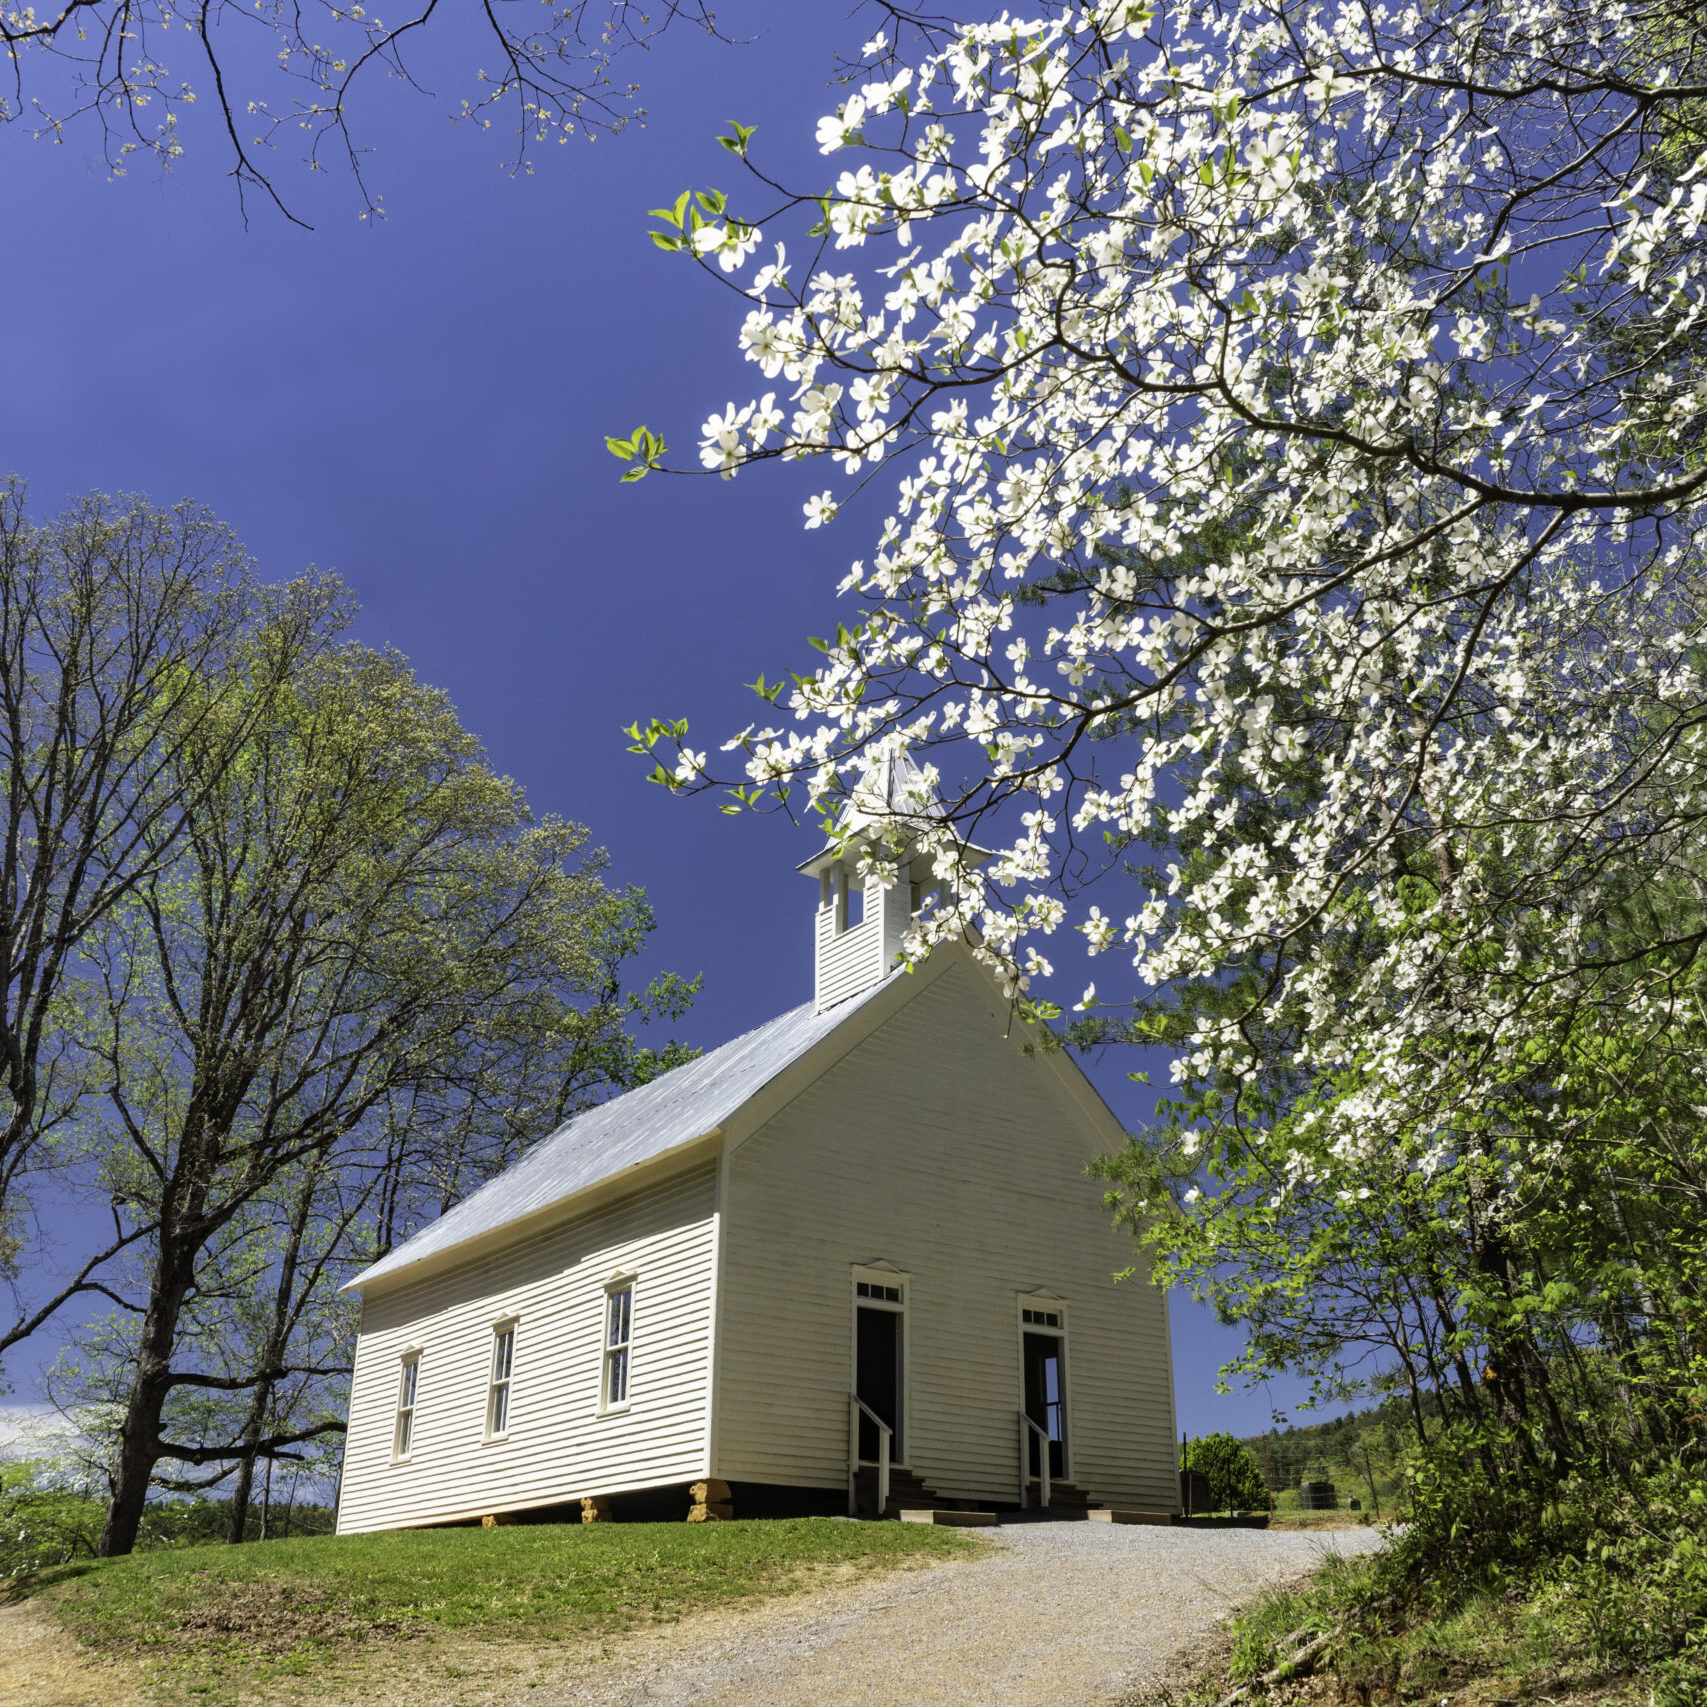 Would you like to get married in Cades Cove? Learn more about weddings in the Great Smoky Mountains National Park here.